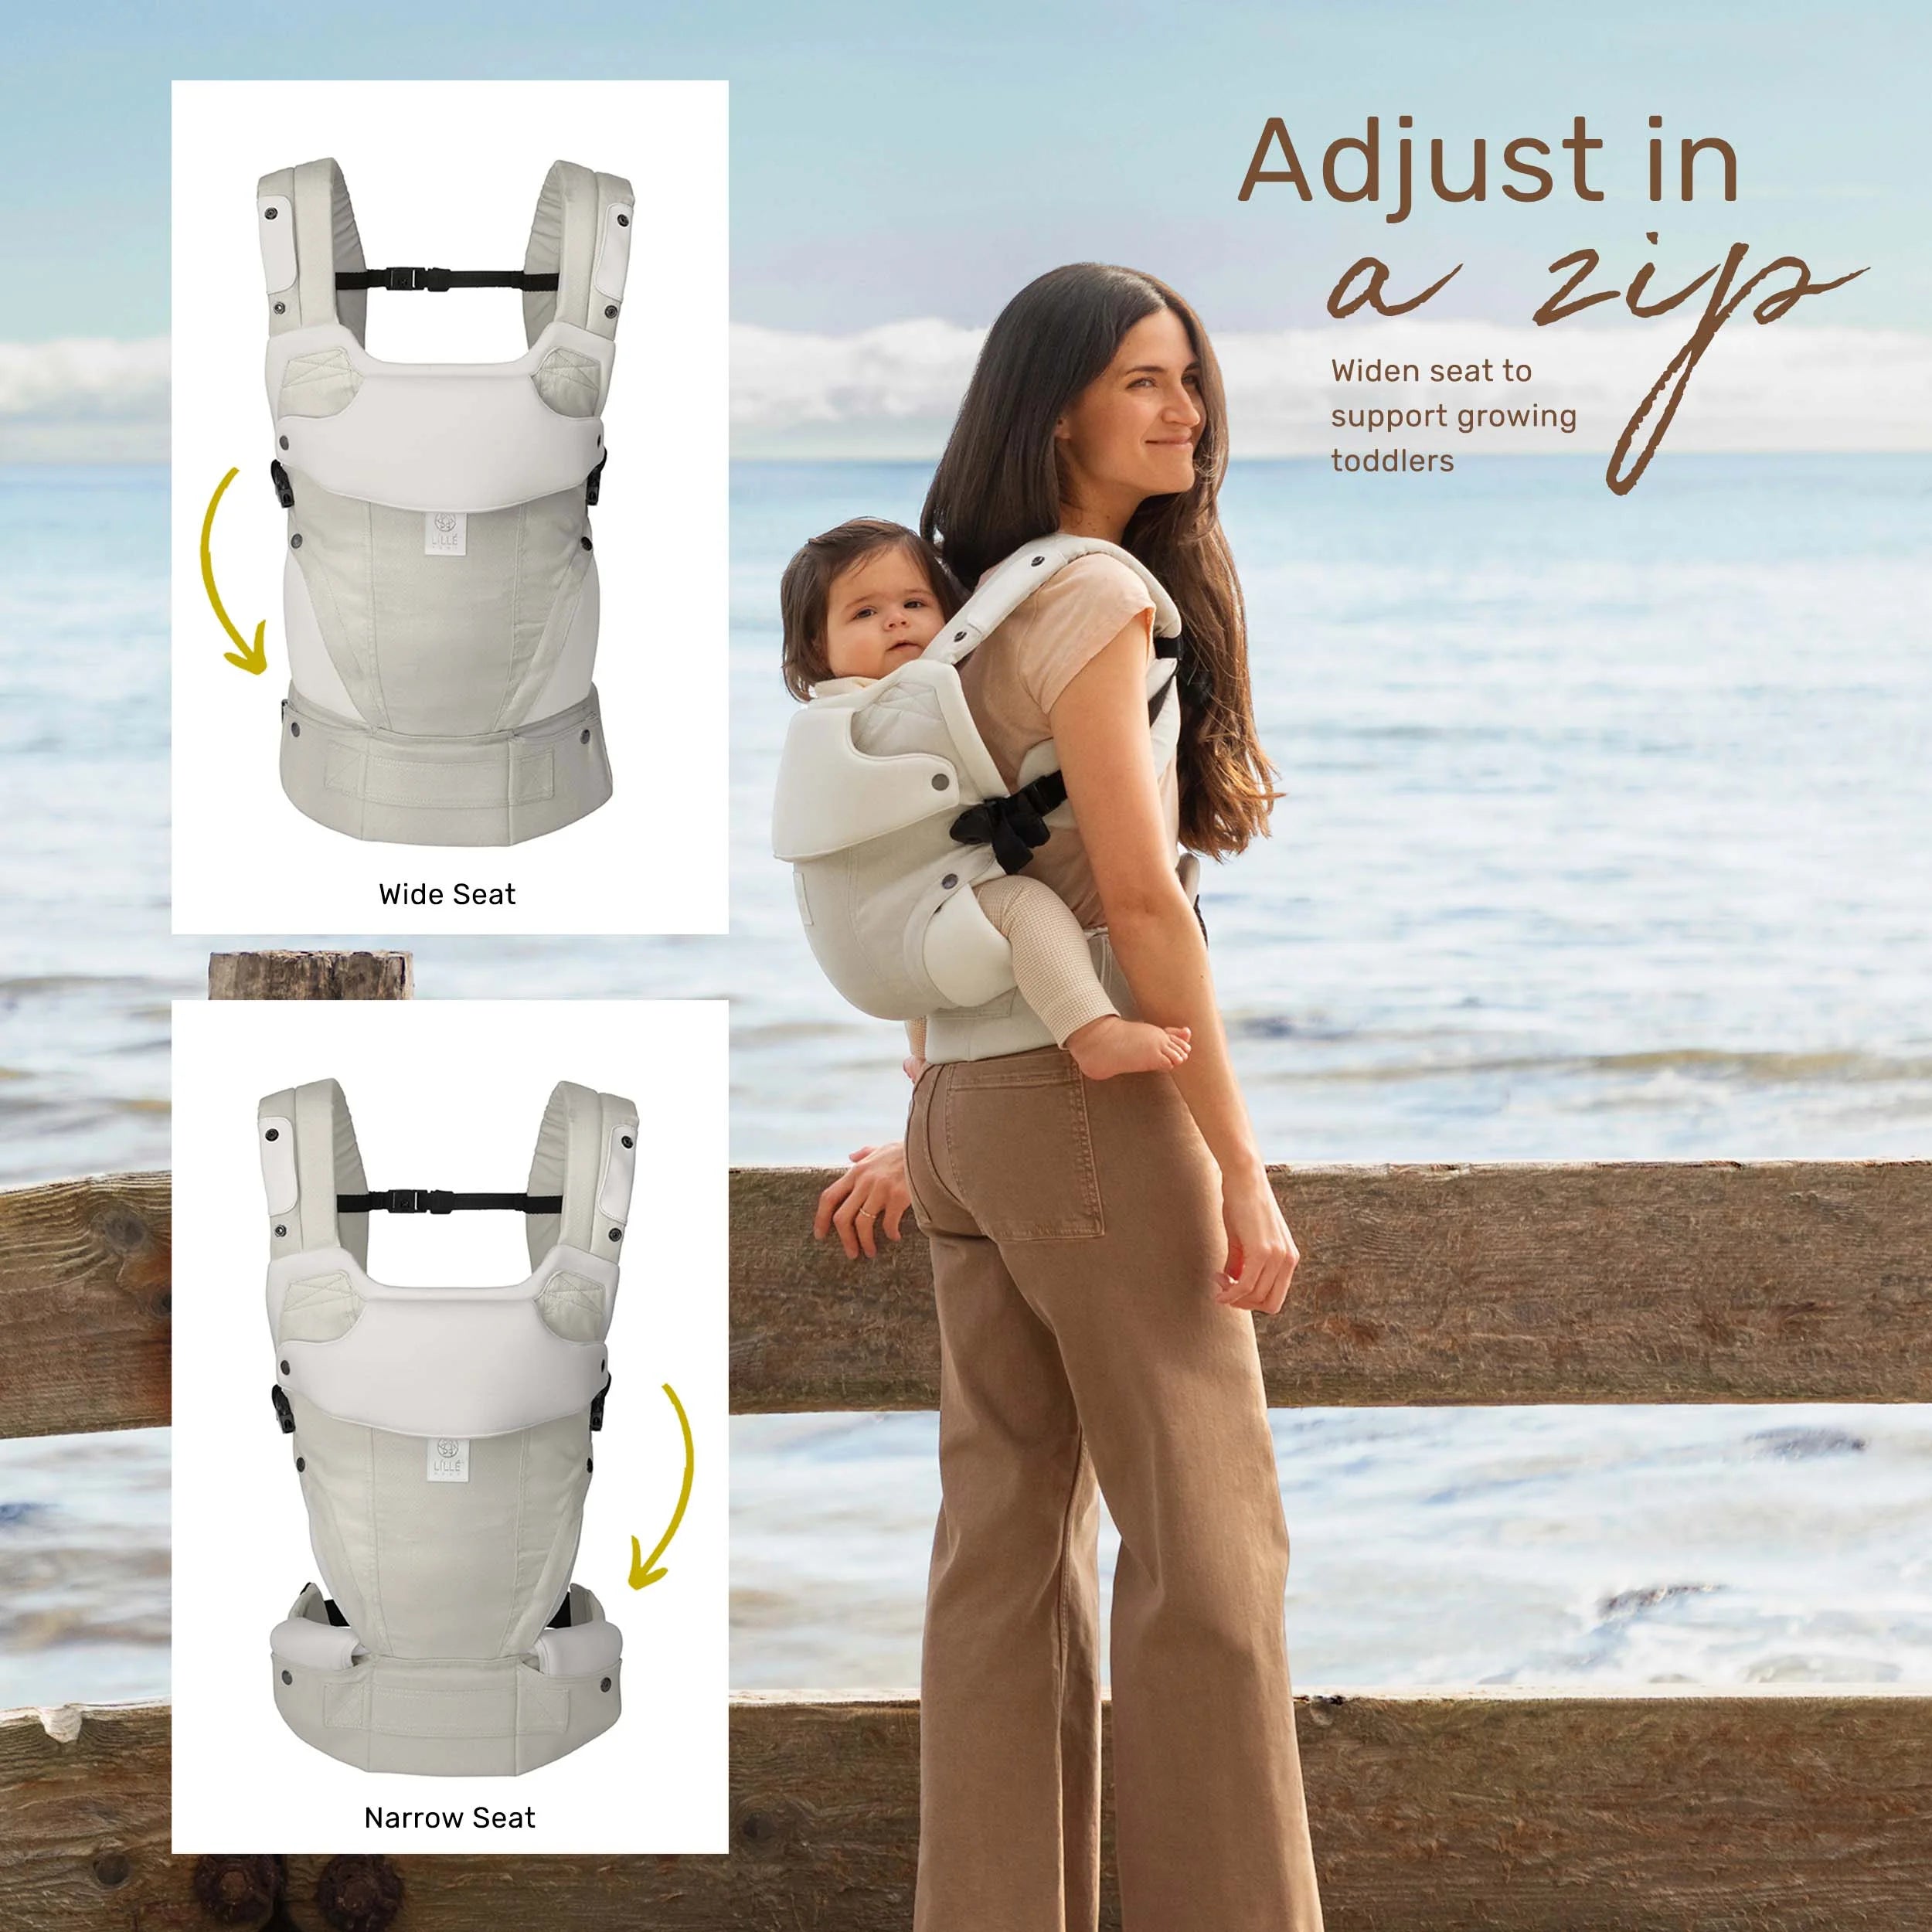 Elevate adjust in a zip! Widen seat to support growing toddlers. Zip up to wide seat and zip down to narrow seat.